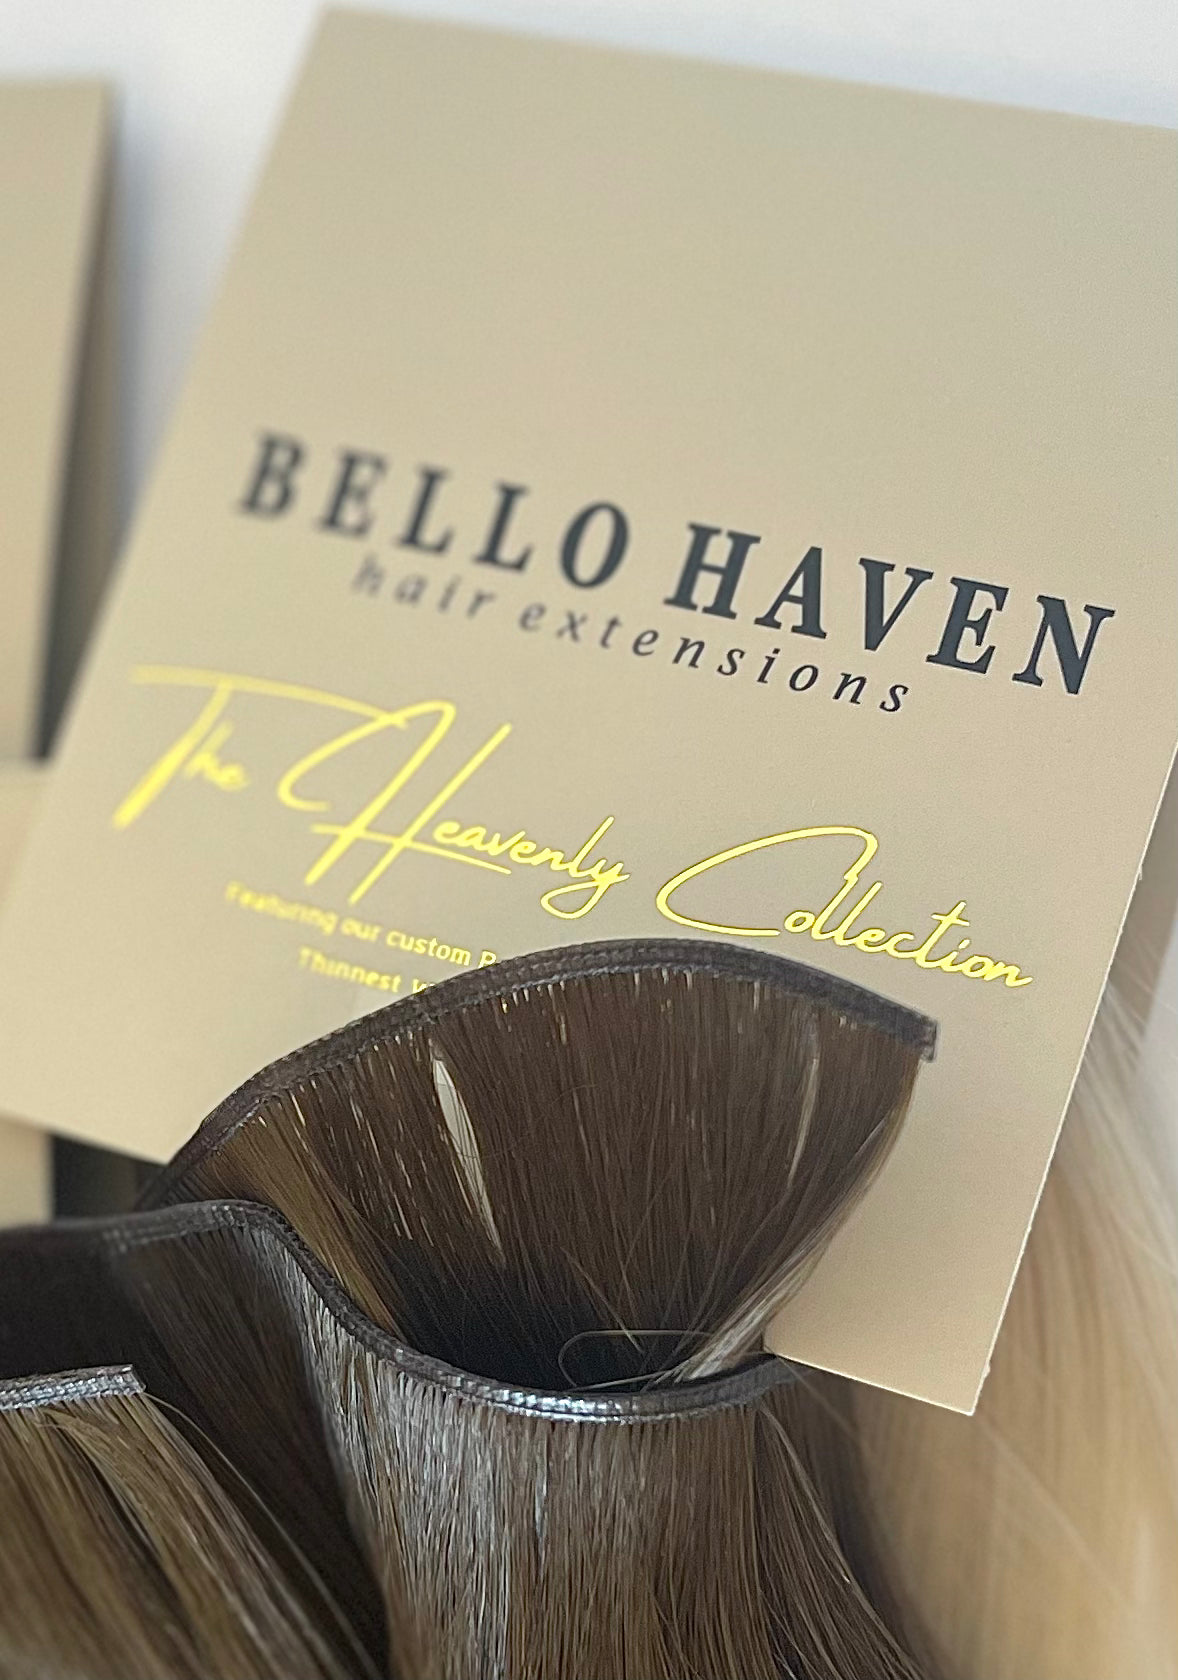 1 heavenly  hairextension packageing